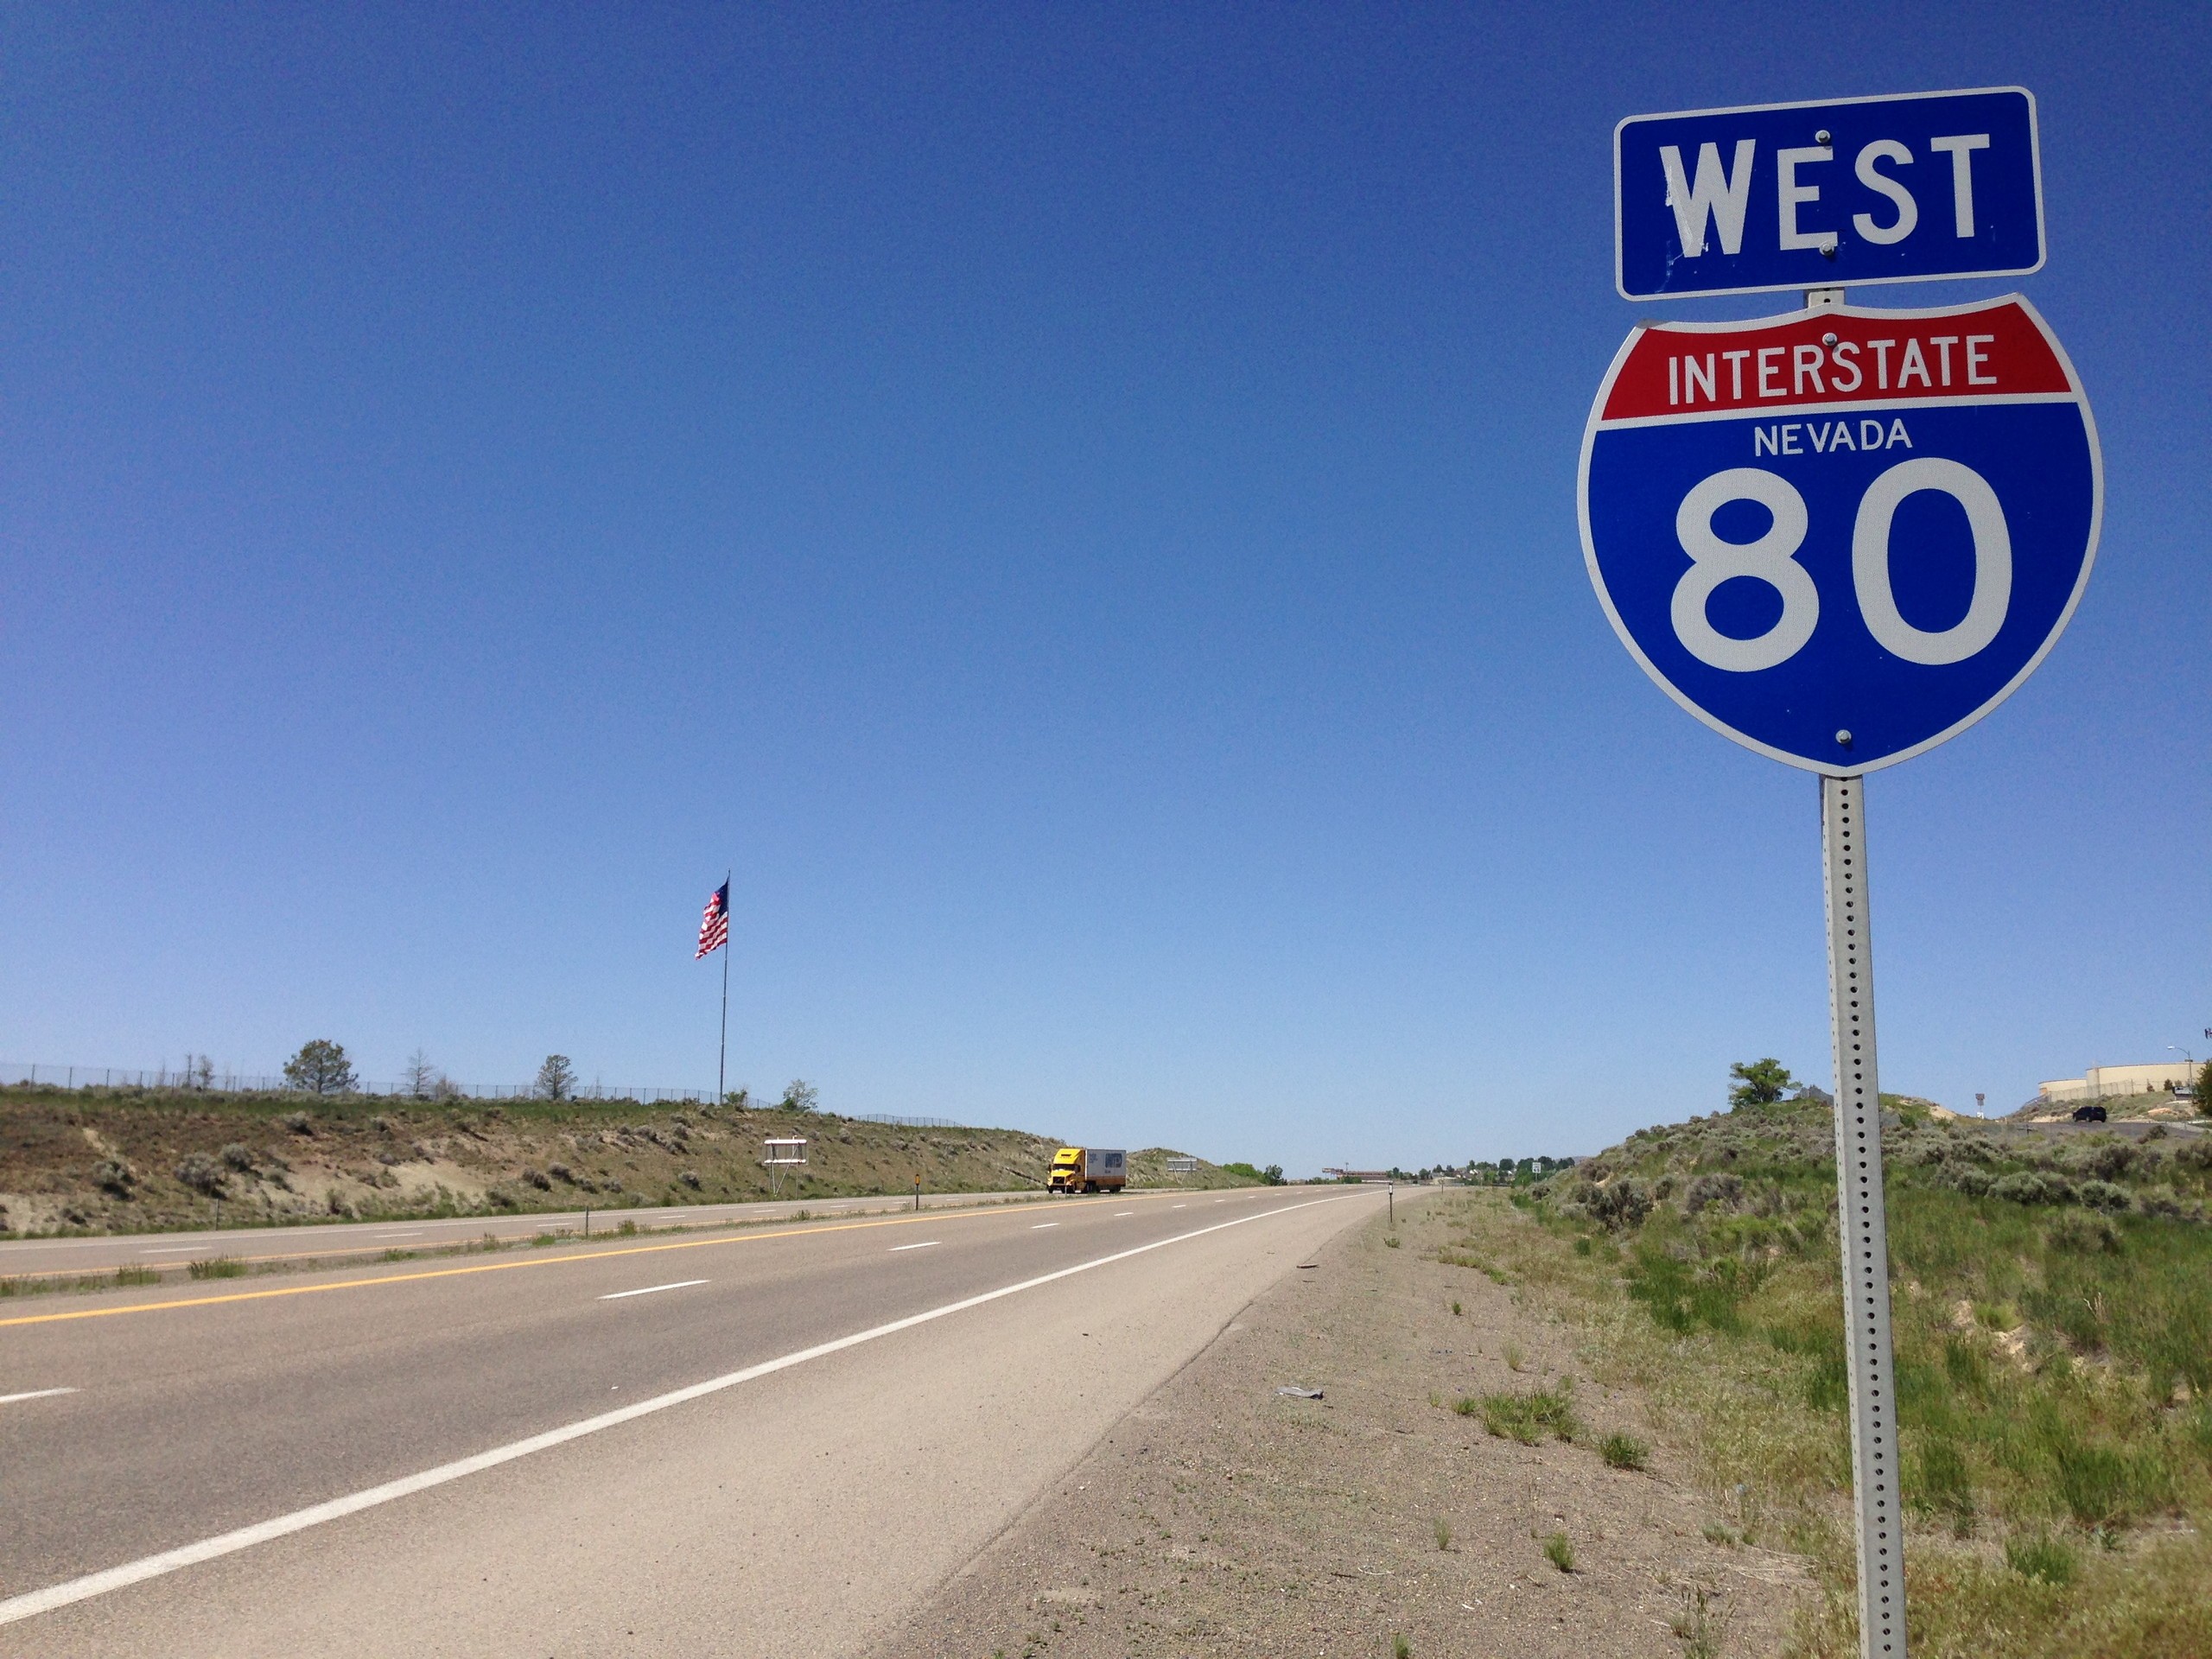 Here S How This 3000 Mile Road Changed The Way Americans Travel 1 